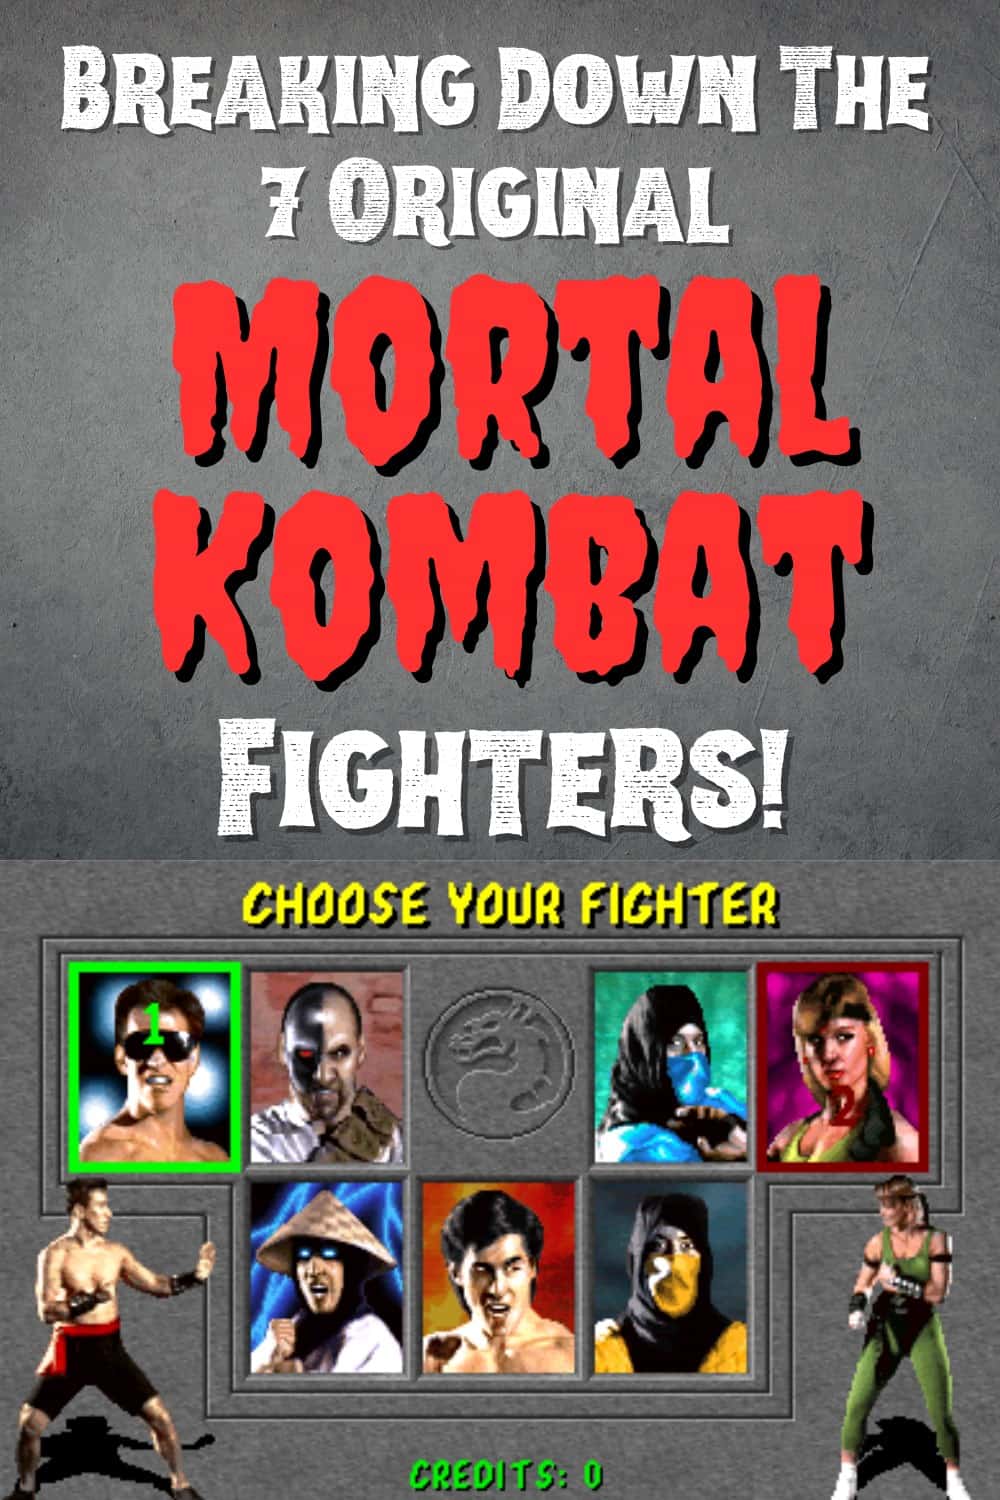 All Characters in the Original Mortal Kombat Arcade Game From 1992